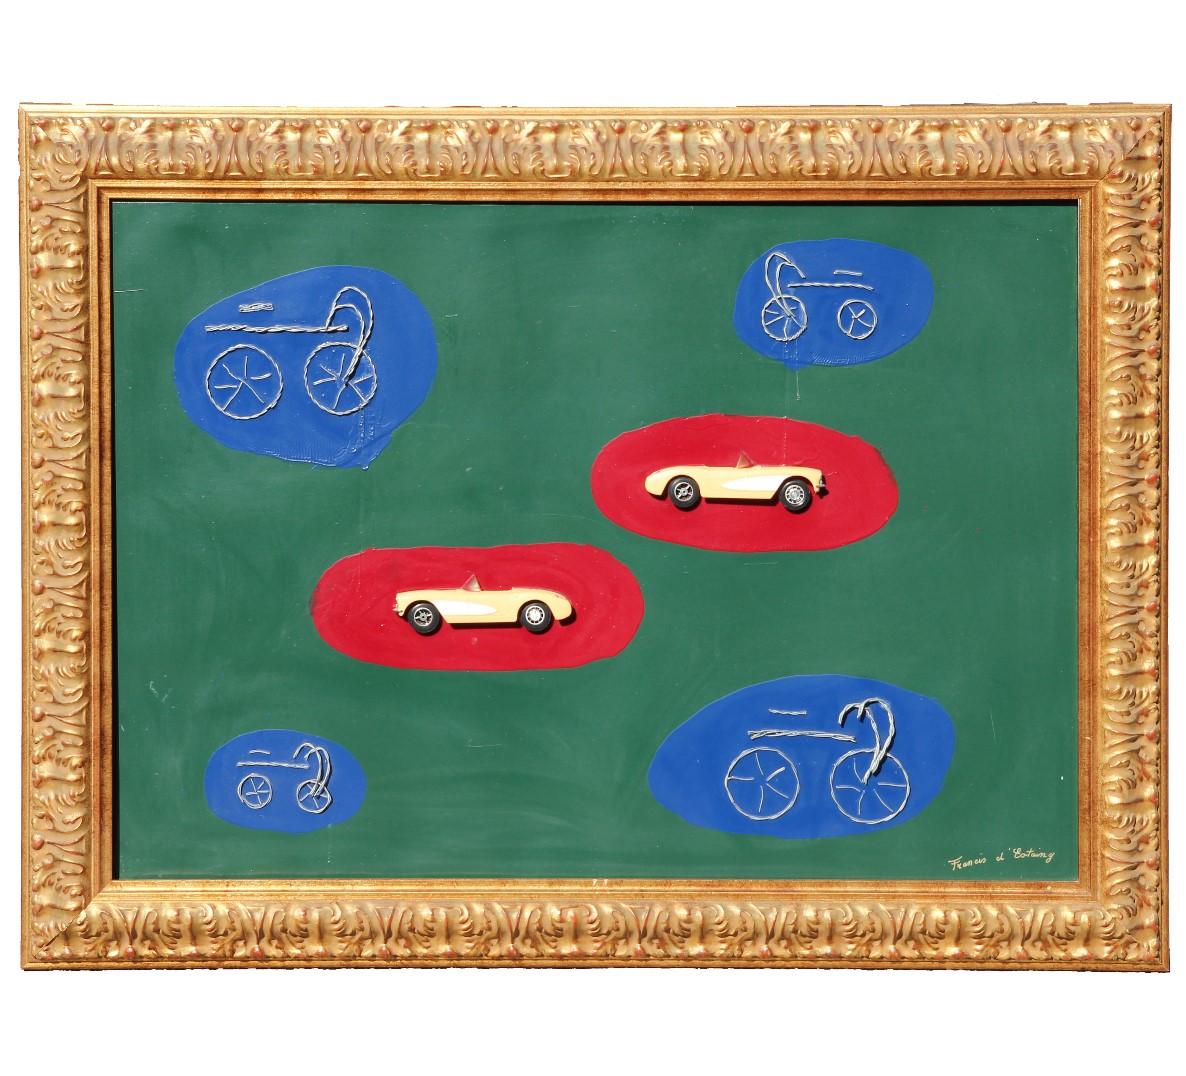 Large Mixed Media Minimal Abstract with Toy Cars